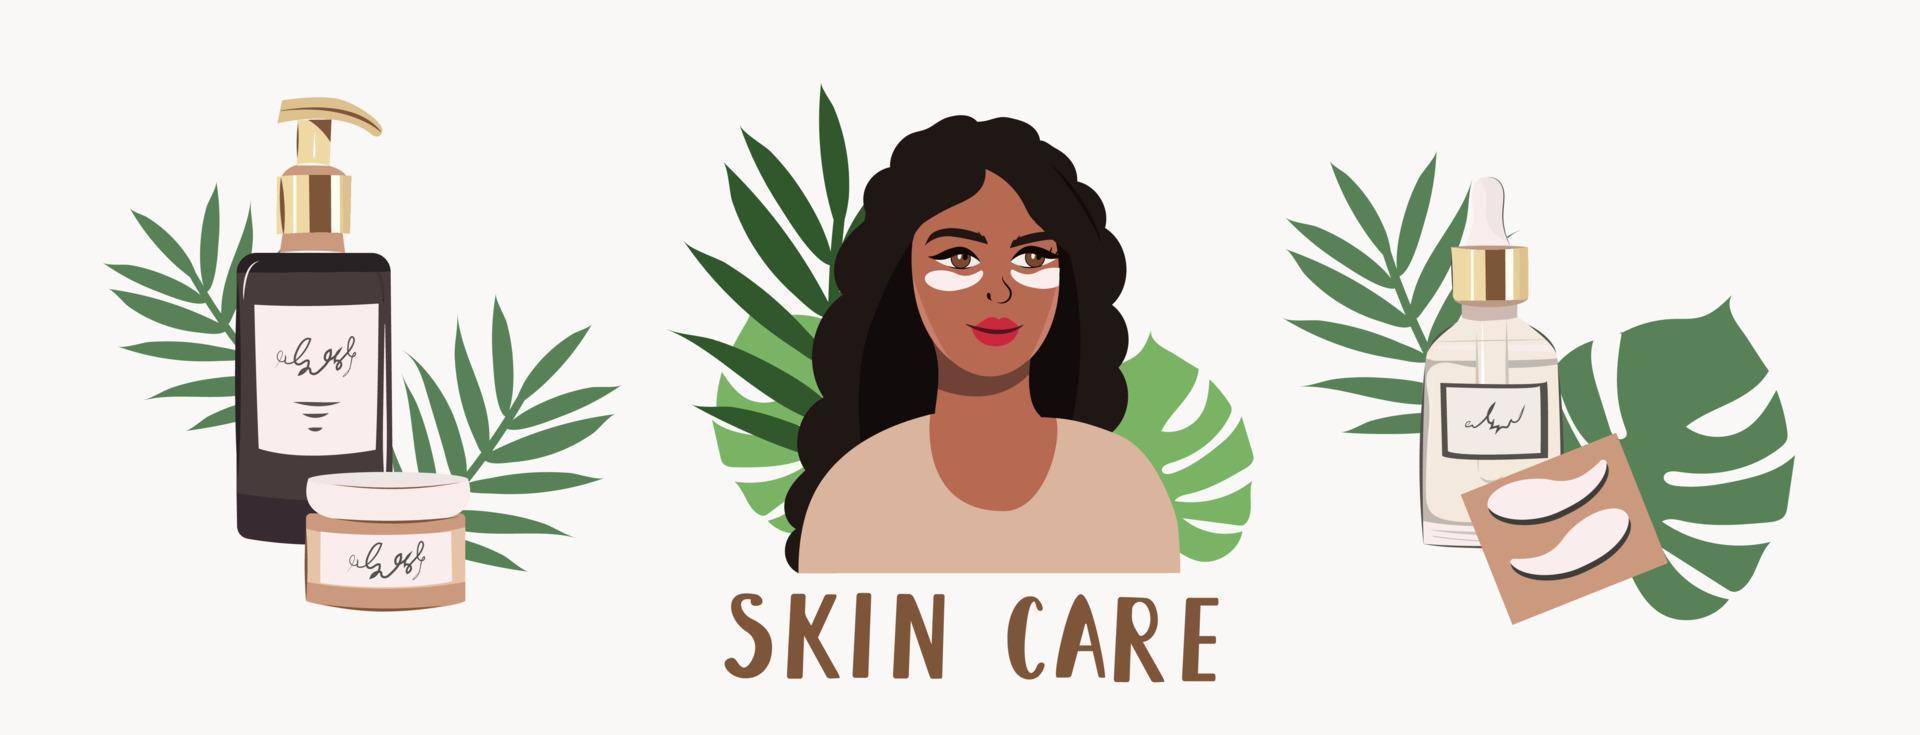 Set of illustrations. Portrait of a black woman with a care mask on her face. Lettering Take care of yourself. Cosmetic packaging, cream, cream mask, serum bottle. vector